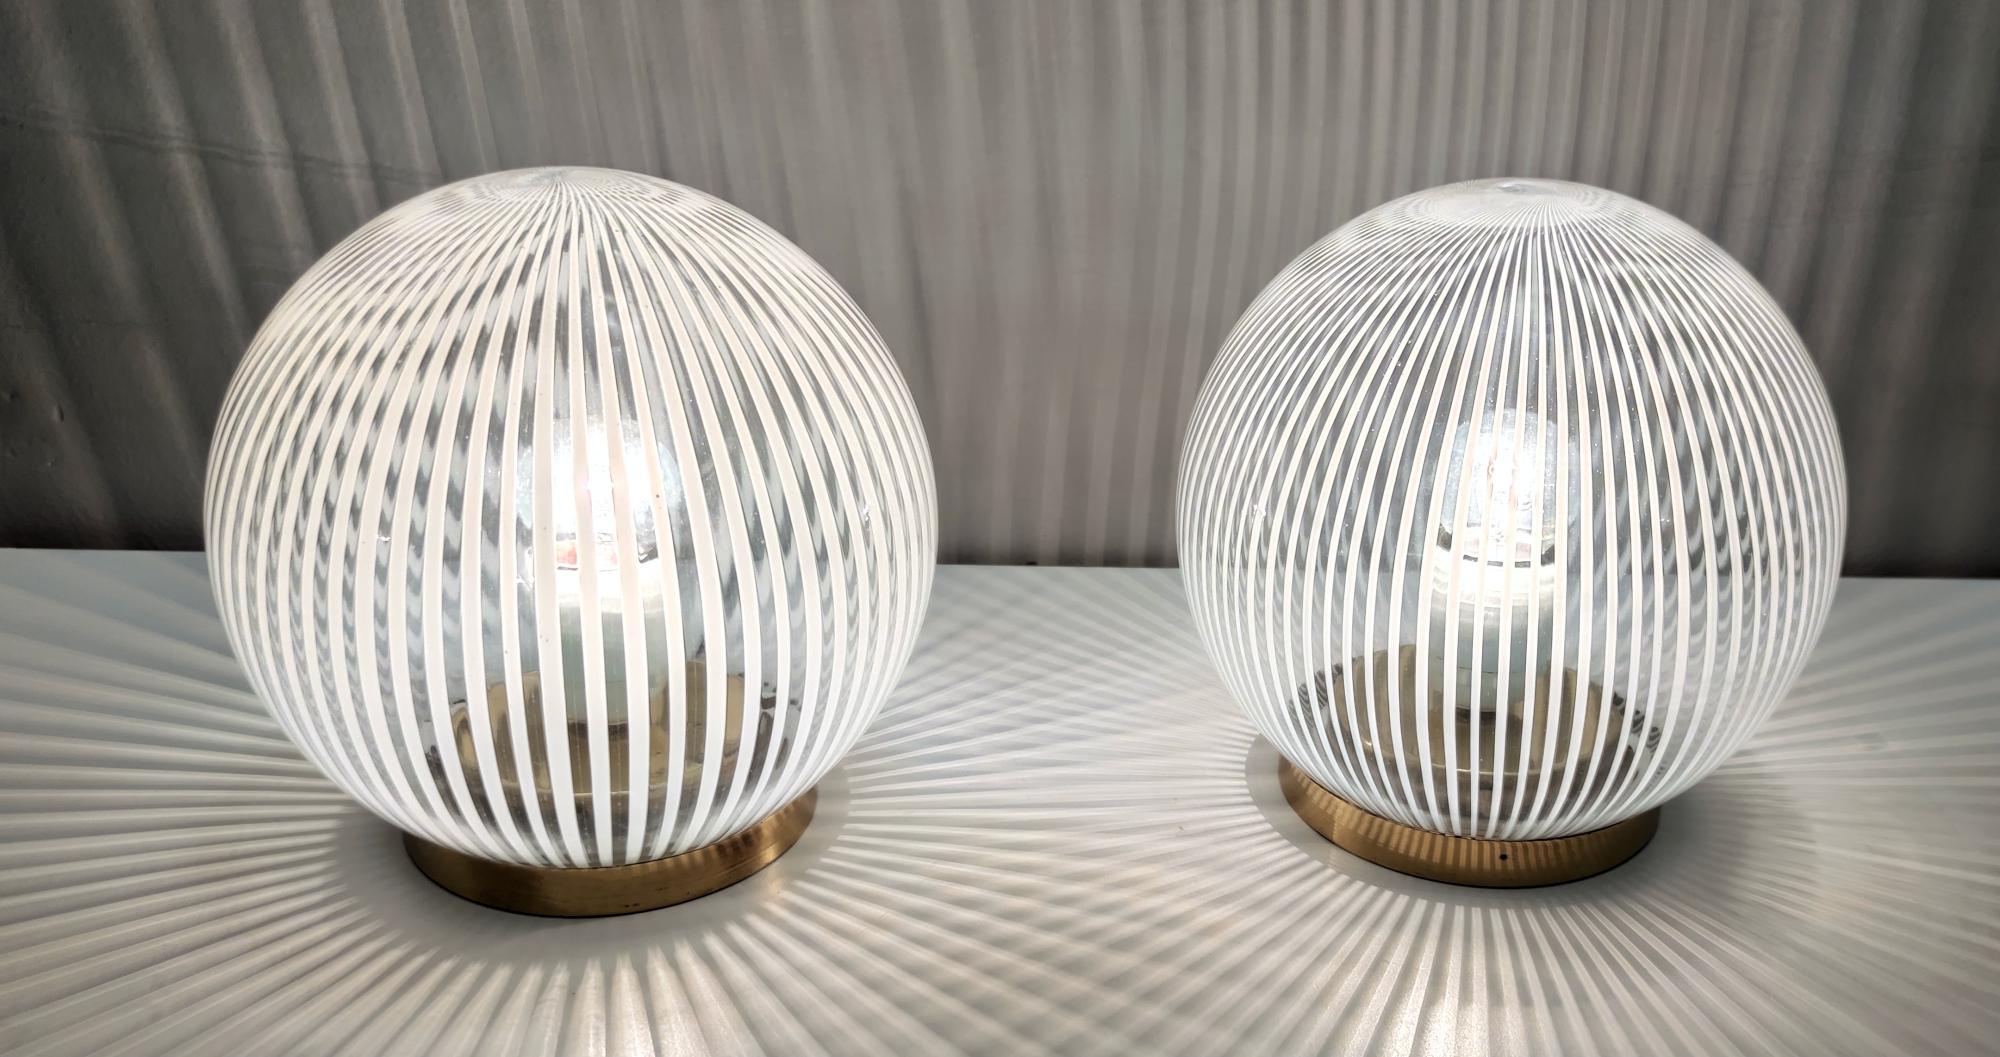 Made in Italy, 1970s.
Made in Murano glass and brass.
These table lamps are vintage pieces, therefore they might show slight traces of use, but they can be considered as in excellent original condition and ready to give a beautiful ambiance to any